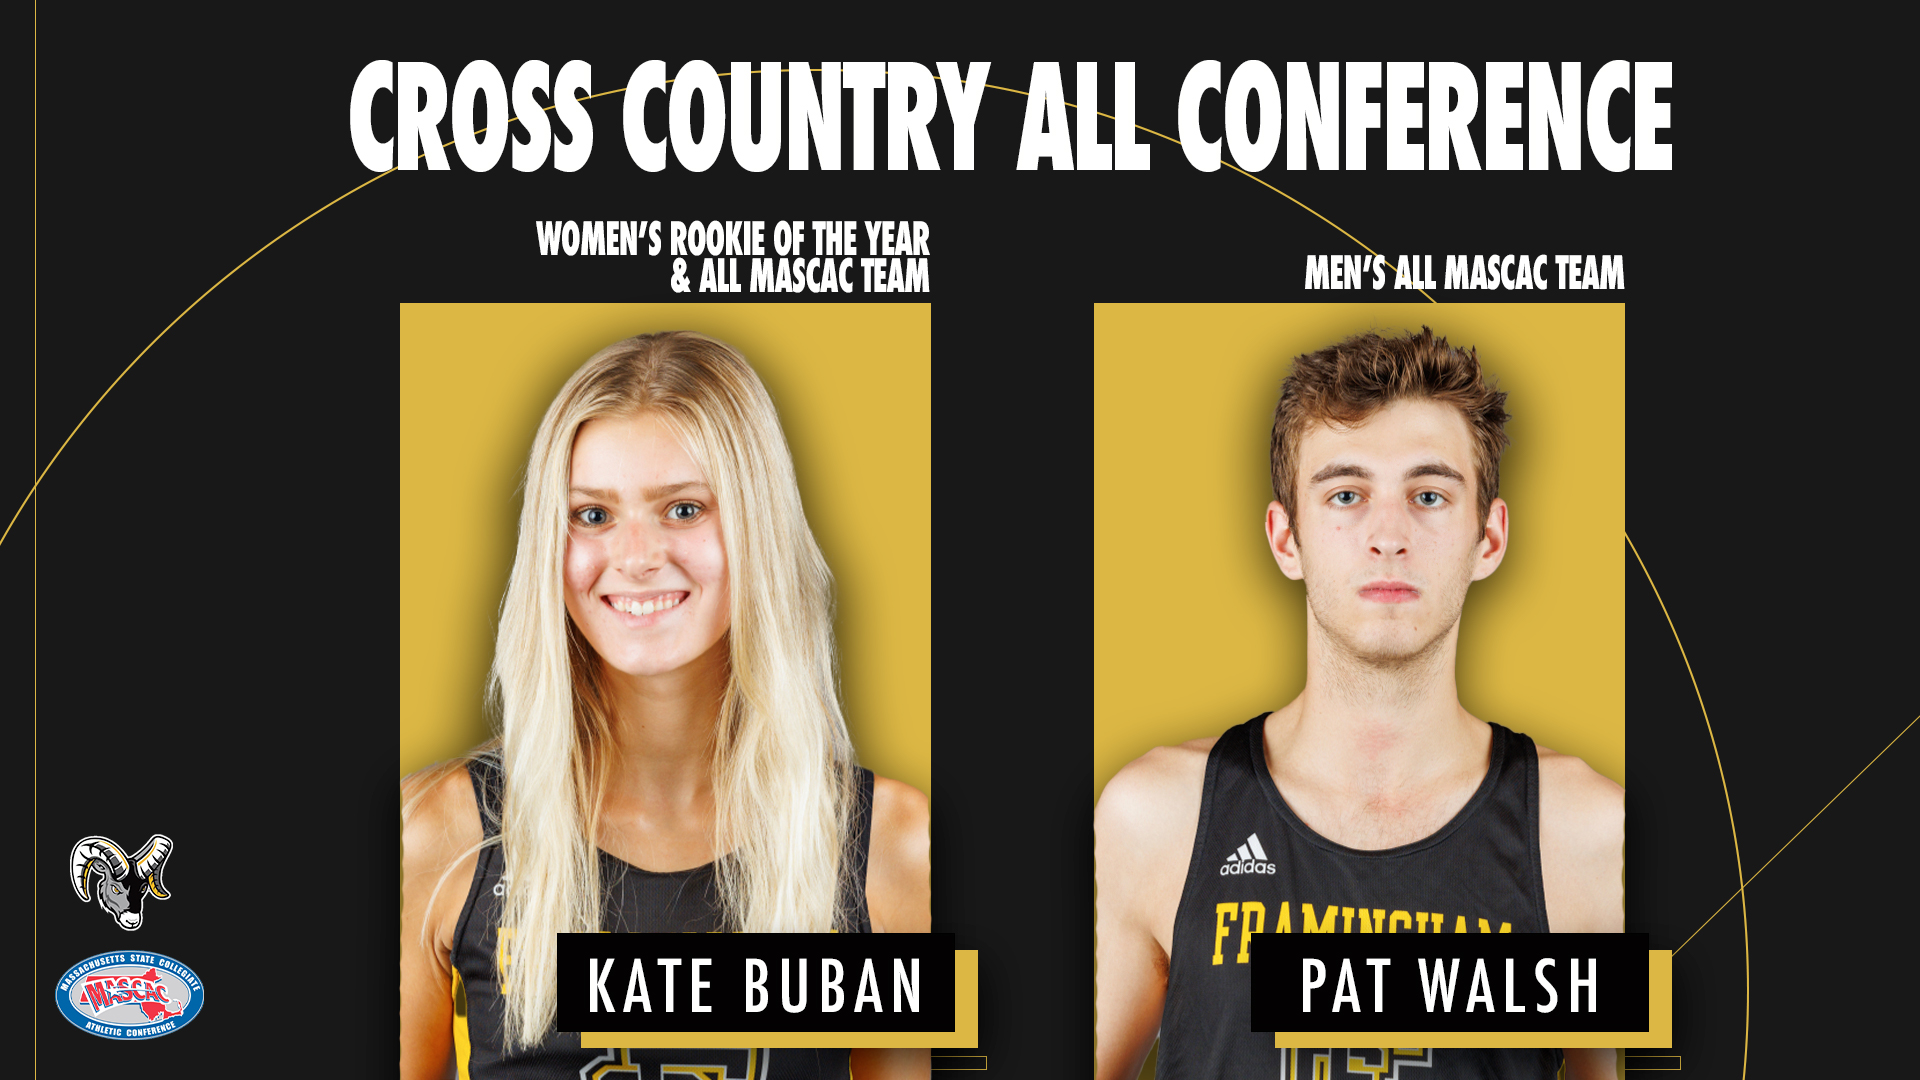 Buban and Walsh Earn All-MASCAC Cross Country Honors – Buban Named Rookie of the Year